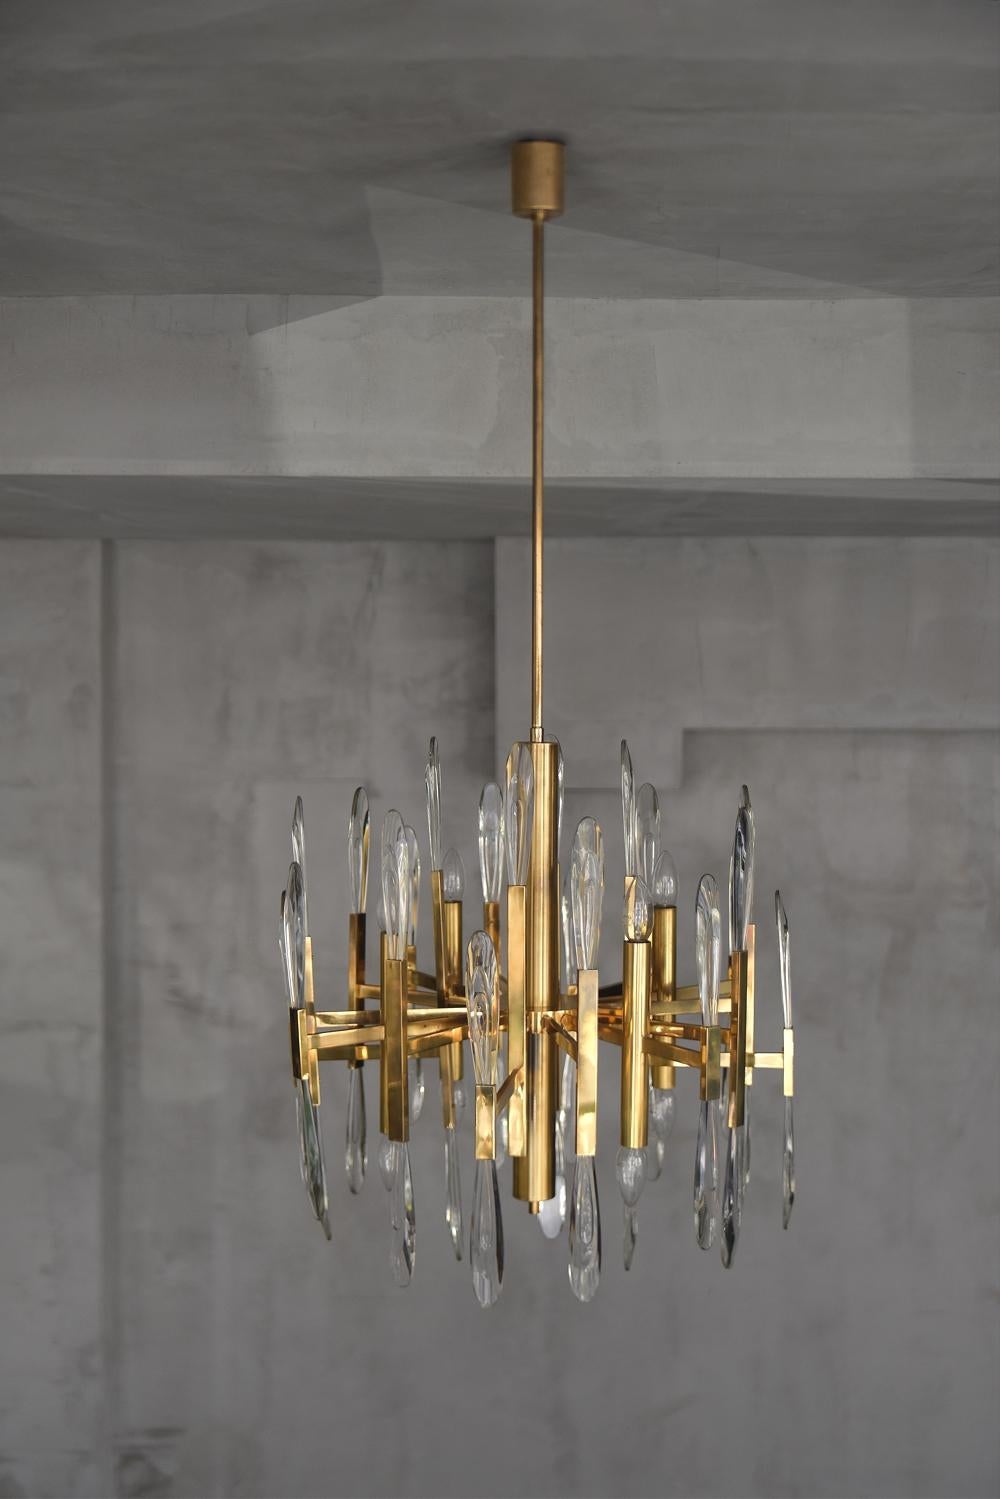 This stunning Midcentury Modern chandelier by Gaetano Sciolari was manufactured in Italy during the 1970s. It is made from highly polished brass, has a beautiful glass drops in the holders and is a work of art. This form showcases a blending